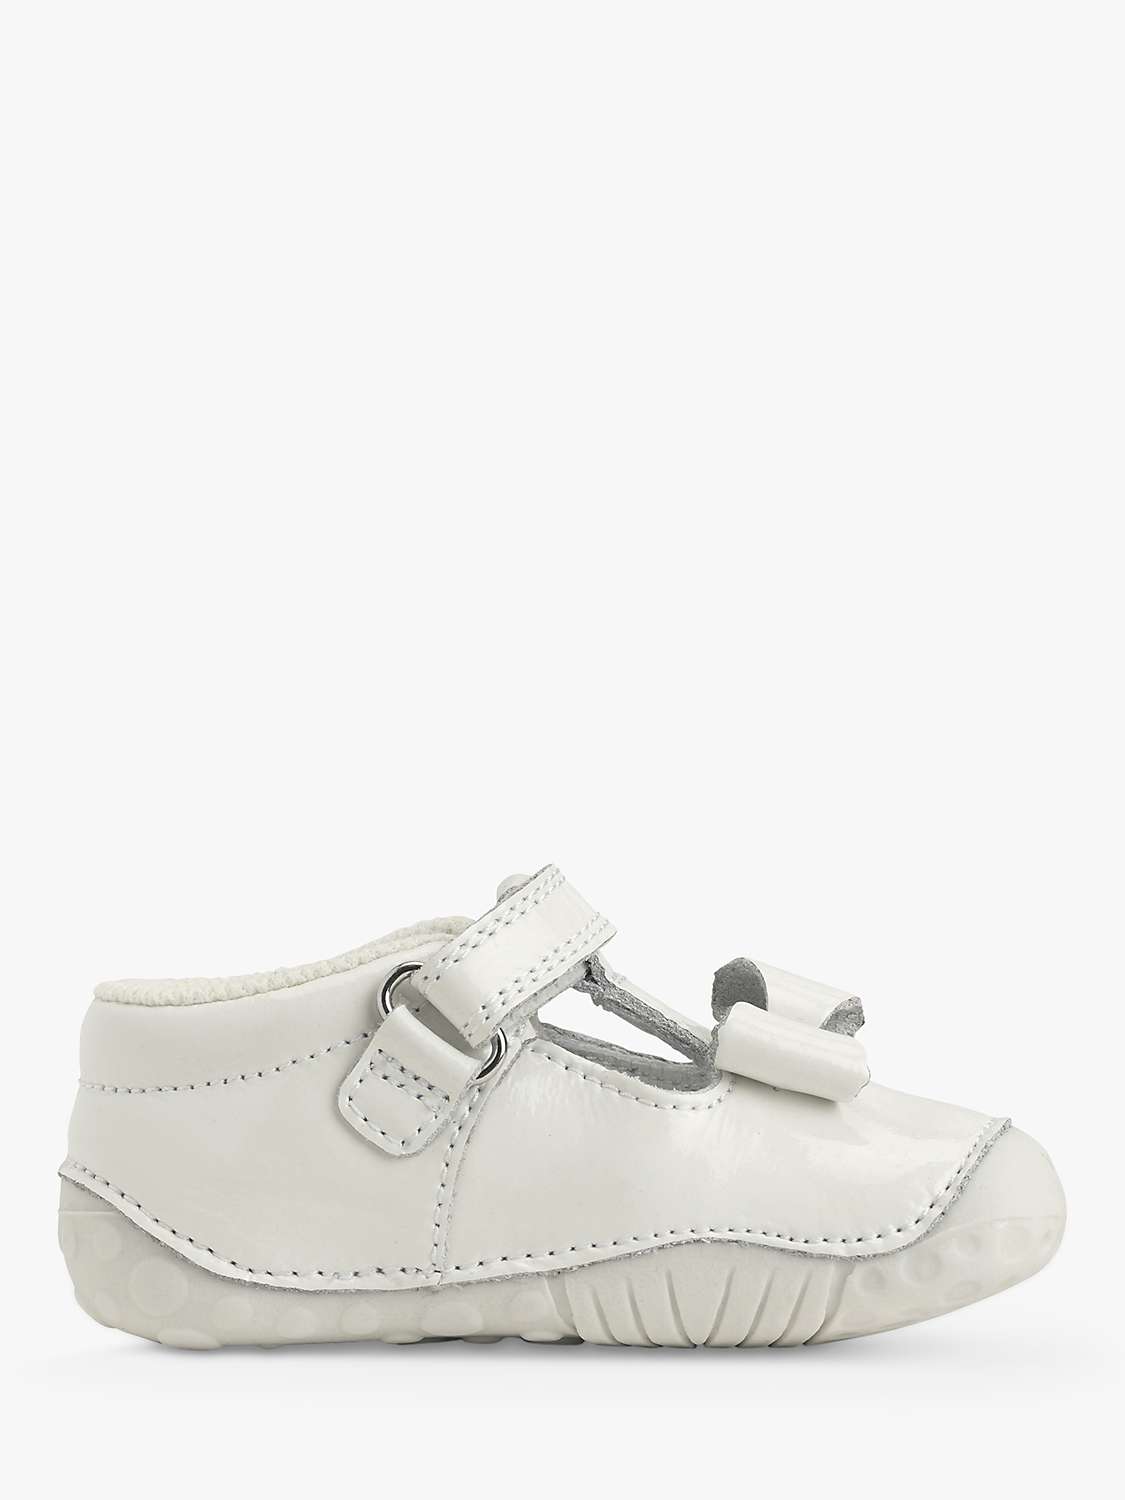 Buy Start-Rite Baby Wiggle Patent Pre-Walker Shoes, White Online at johnlewis.com